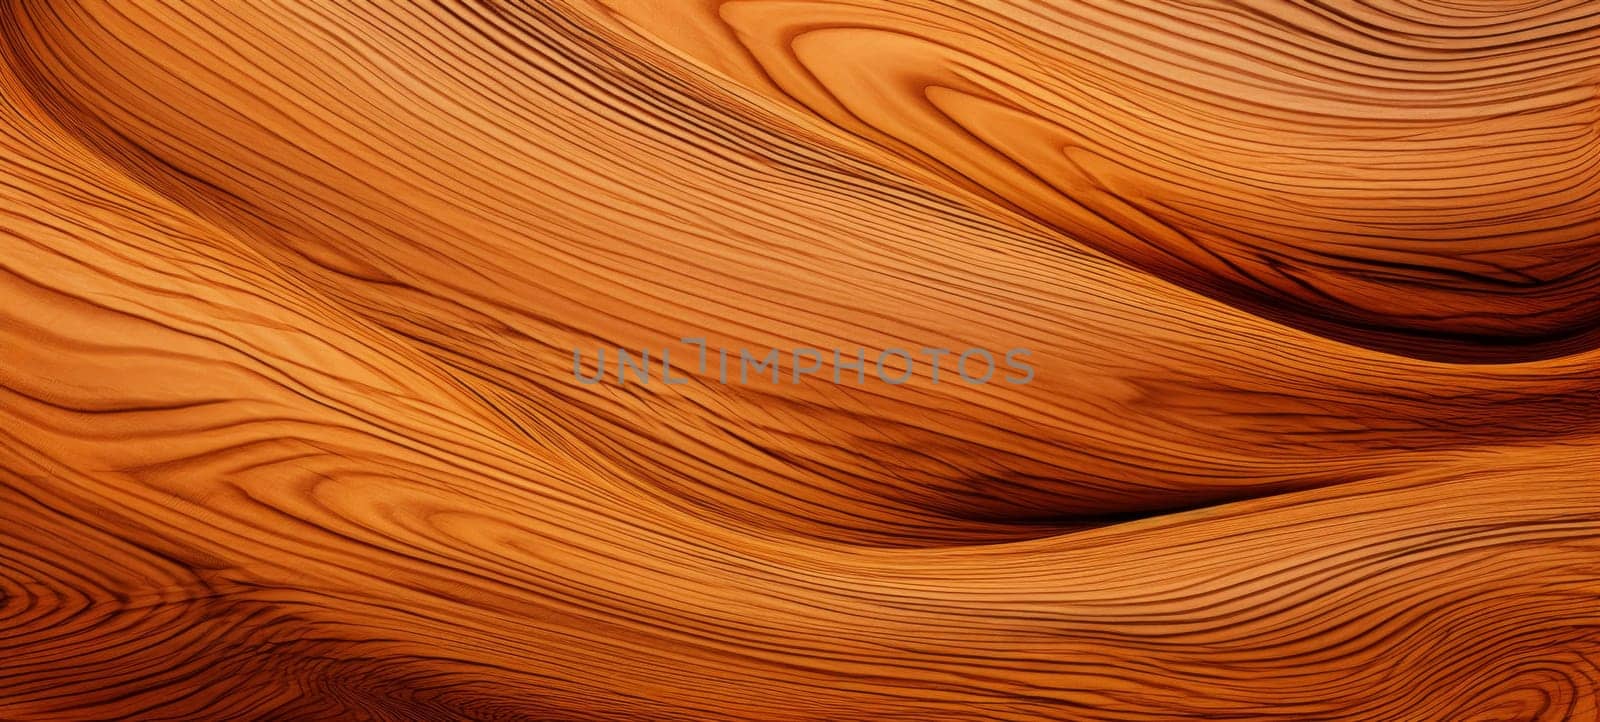 Warm Wooden Texture Waves by andreyz